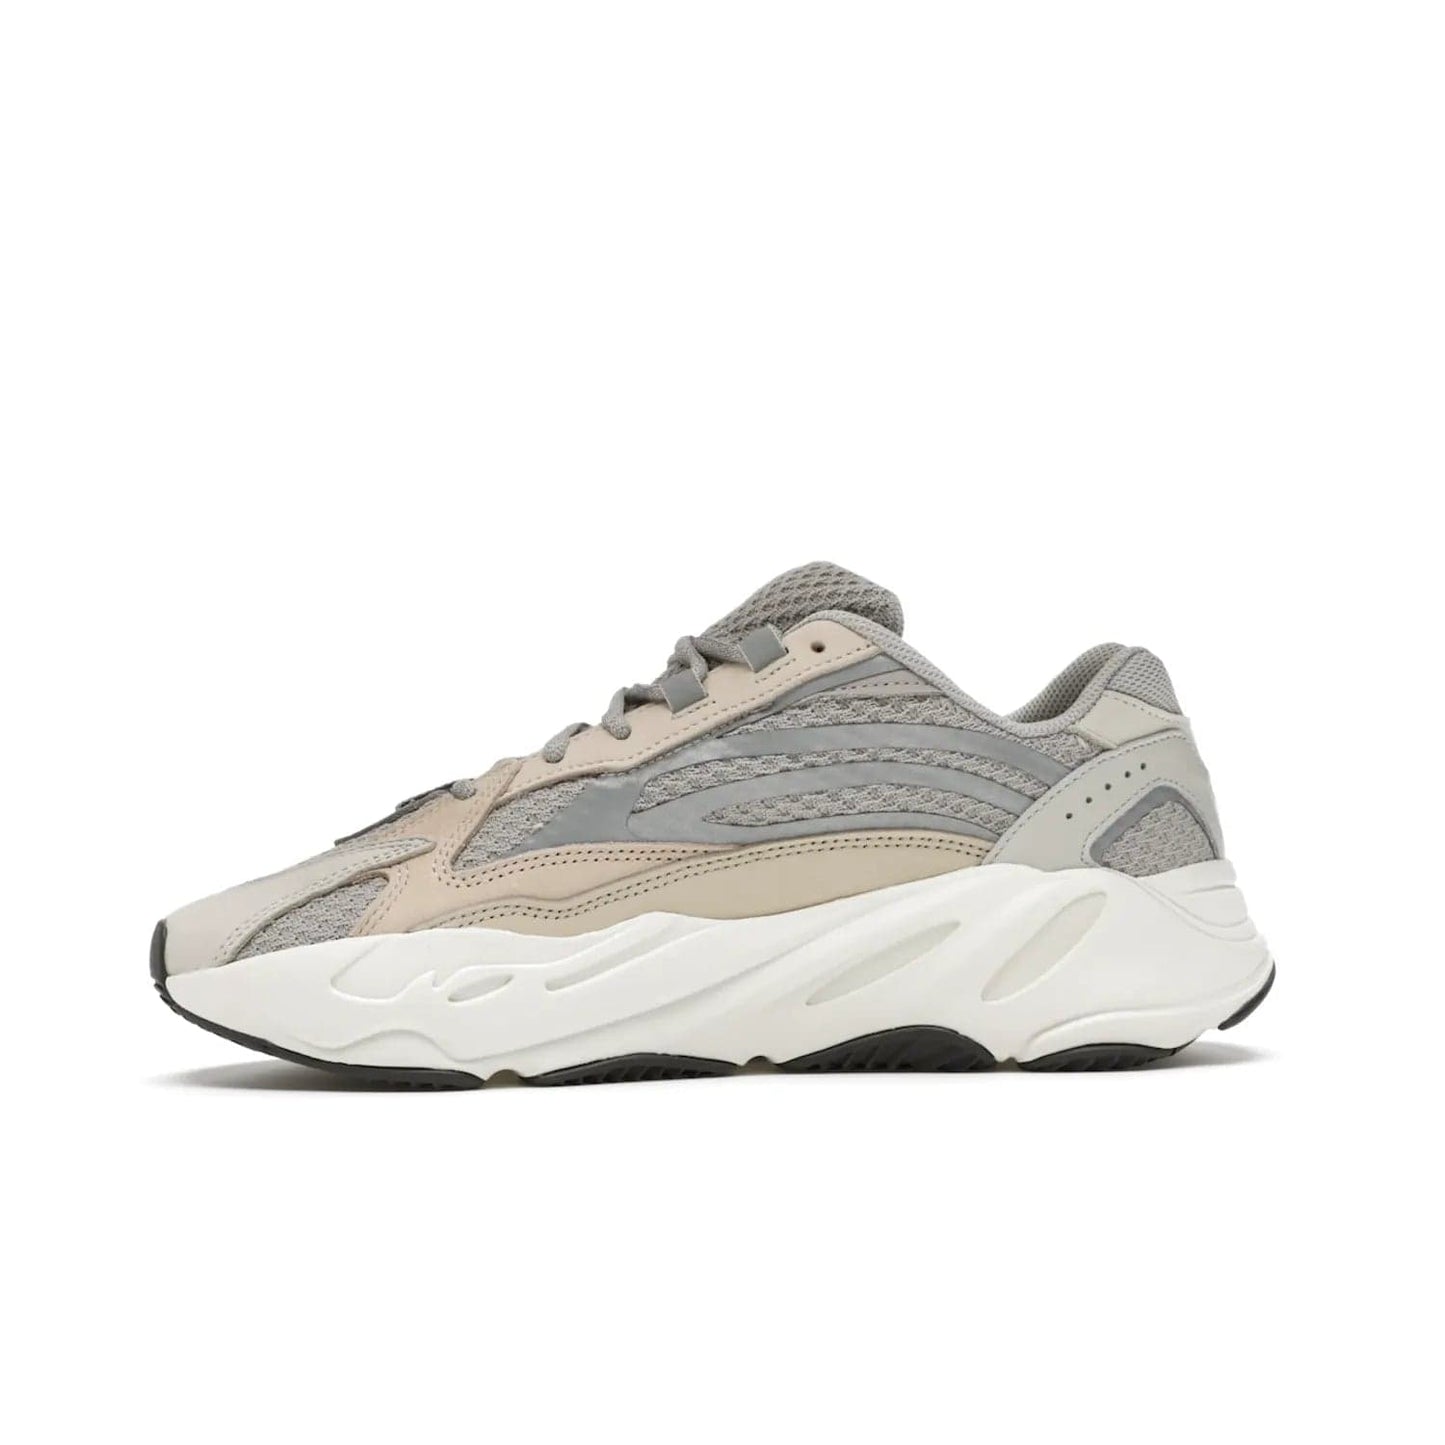 adidas Yeezy Boost 700 V2 Cream - Image 18 - Only at www.BallersClubKickz.com - Add style and luxury to your wardrobe with the adidas Yeezy 700 V2 Cream. Featuring a unique reflective upper, leather overlays, mesh underlays and the signature BOOST midsole, this silhouette is perfect for any stylish wardrobe.